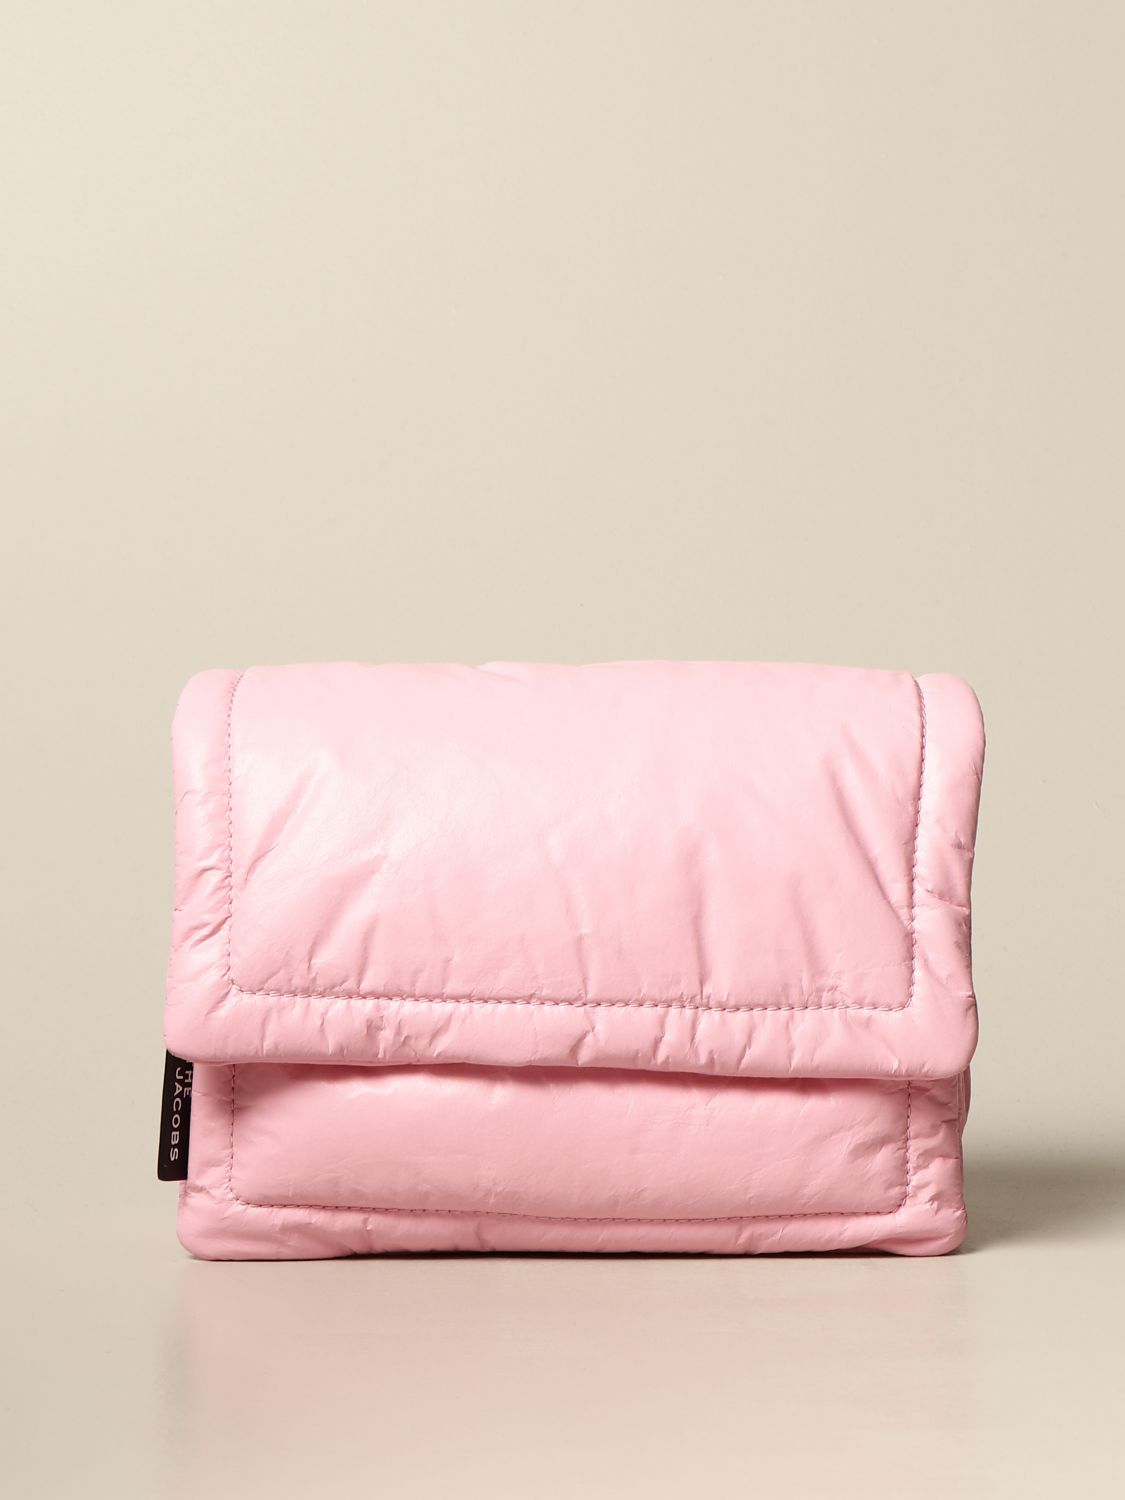 marc jacobs pillow bag outfit